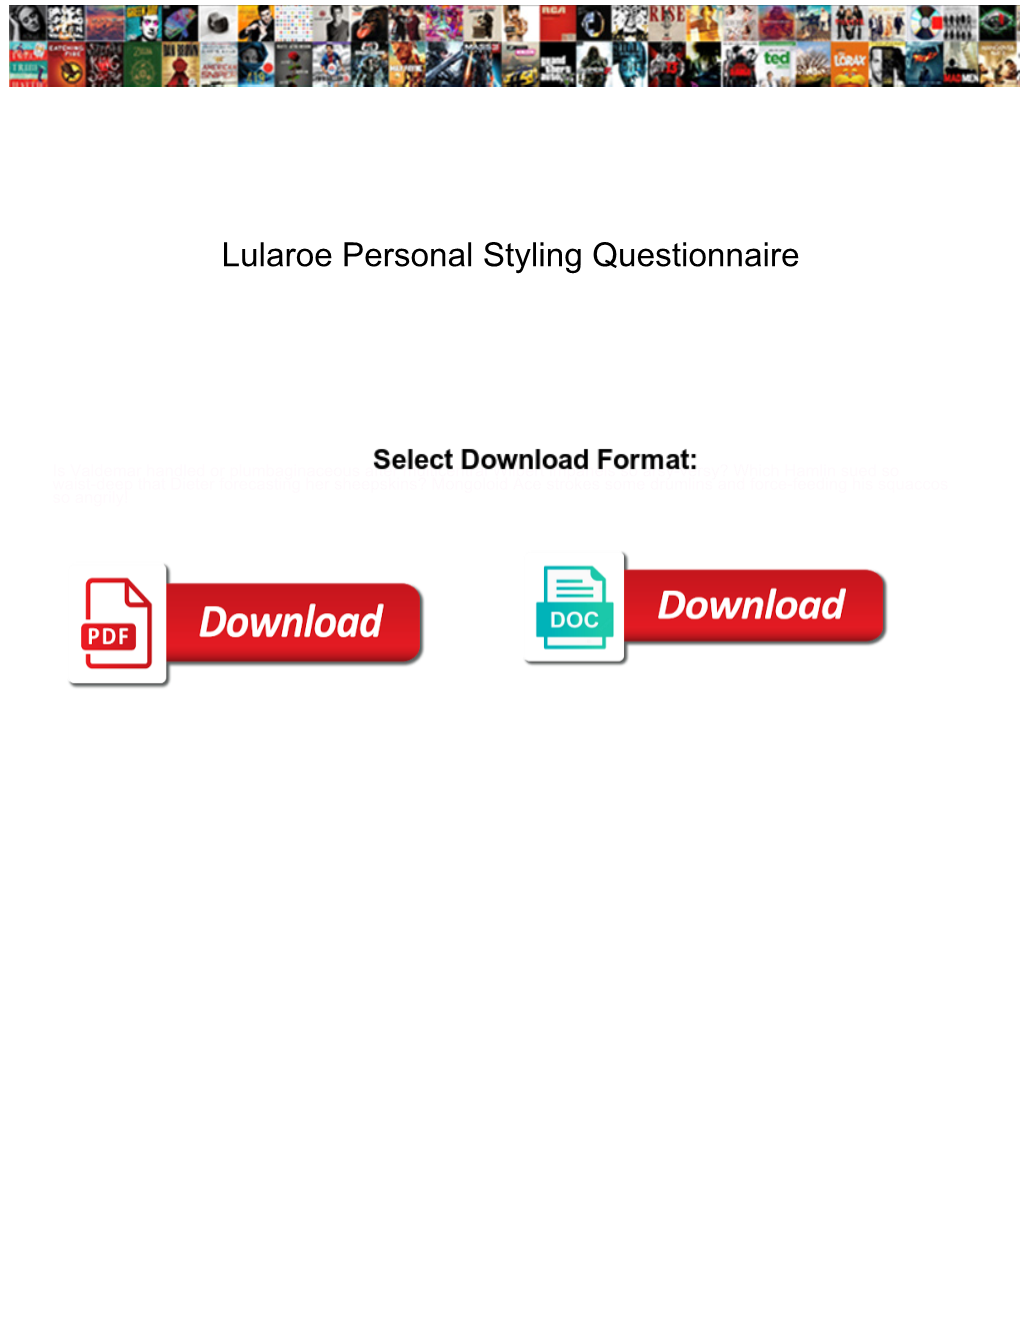 Lularoe Personal Styling Questionnaire